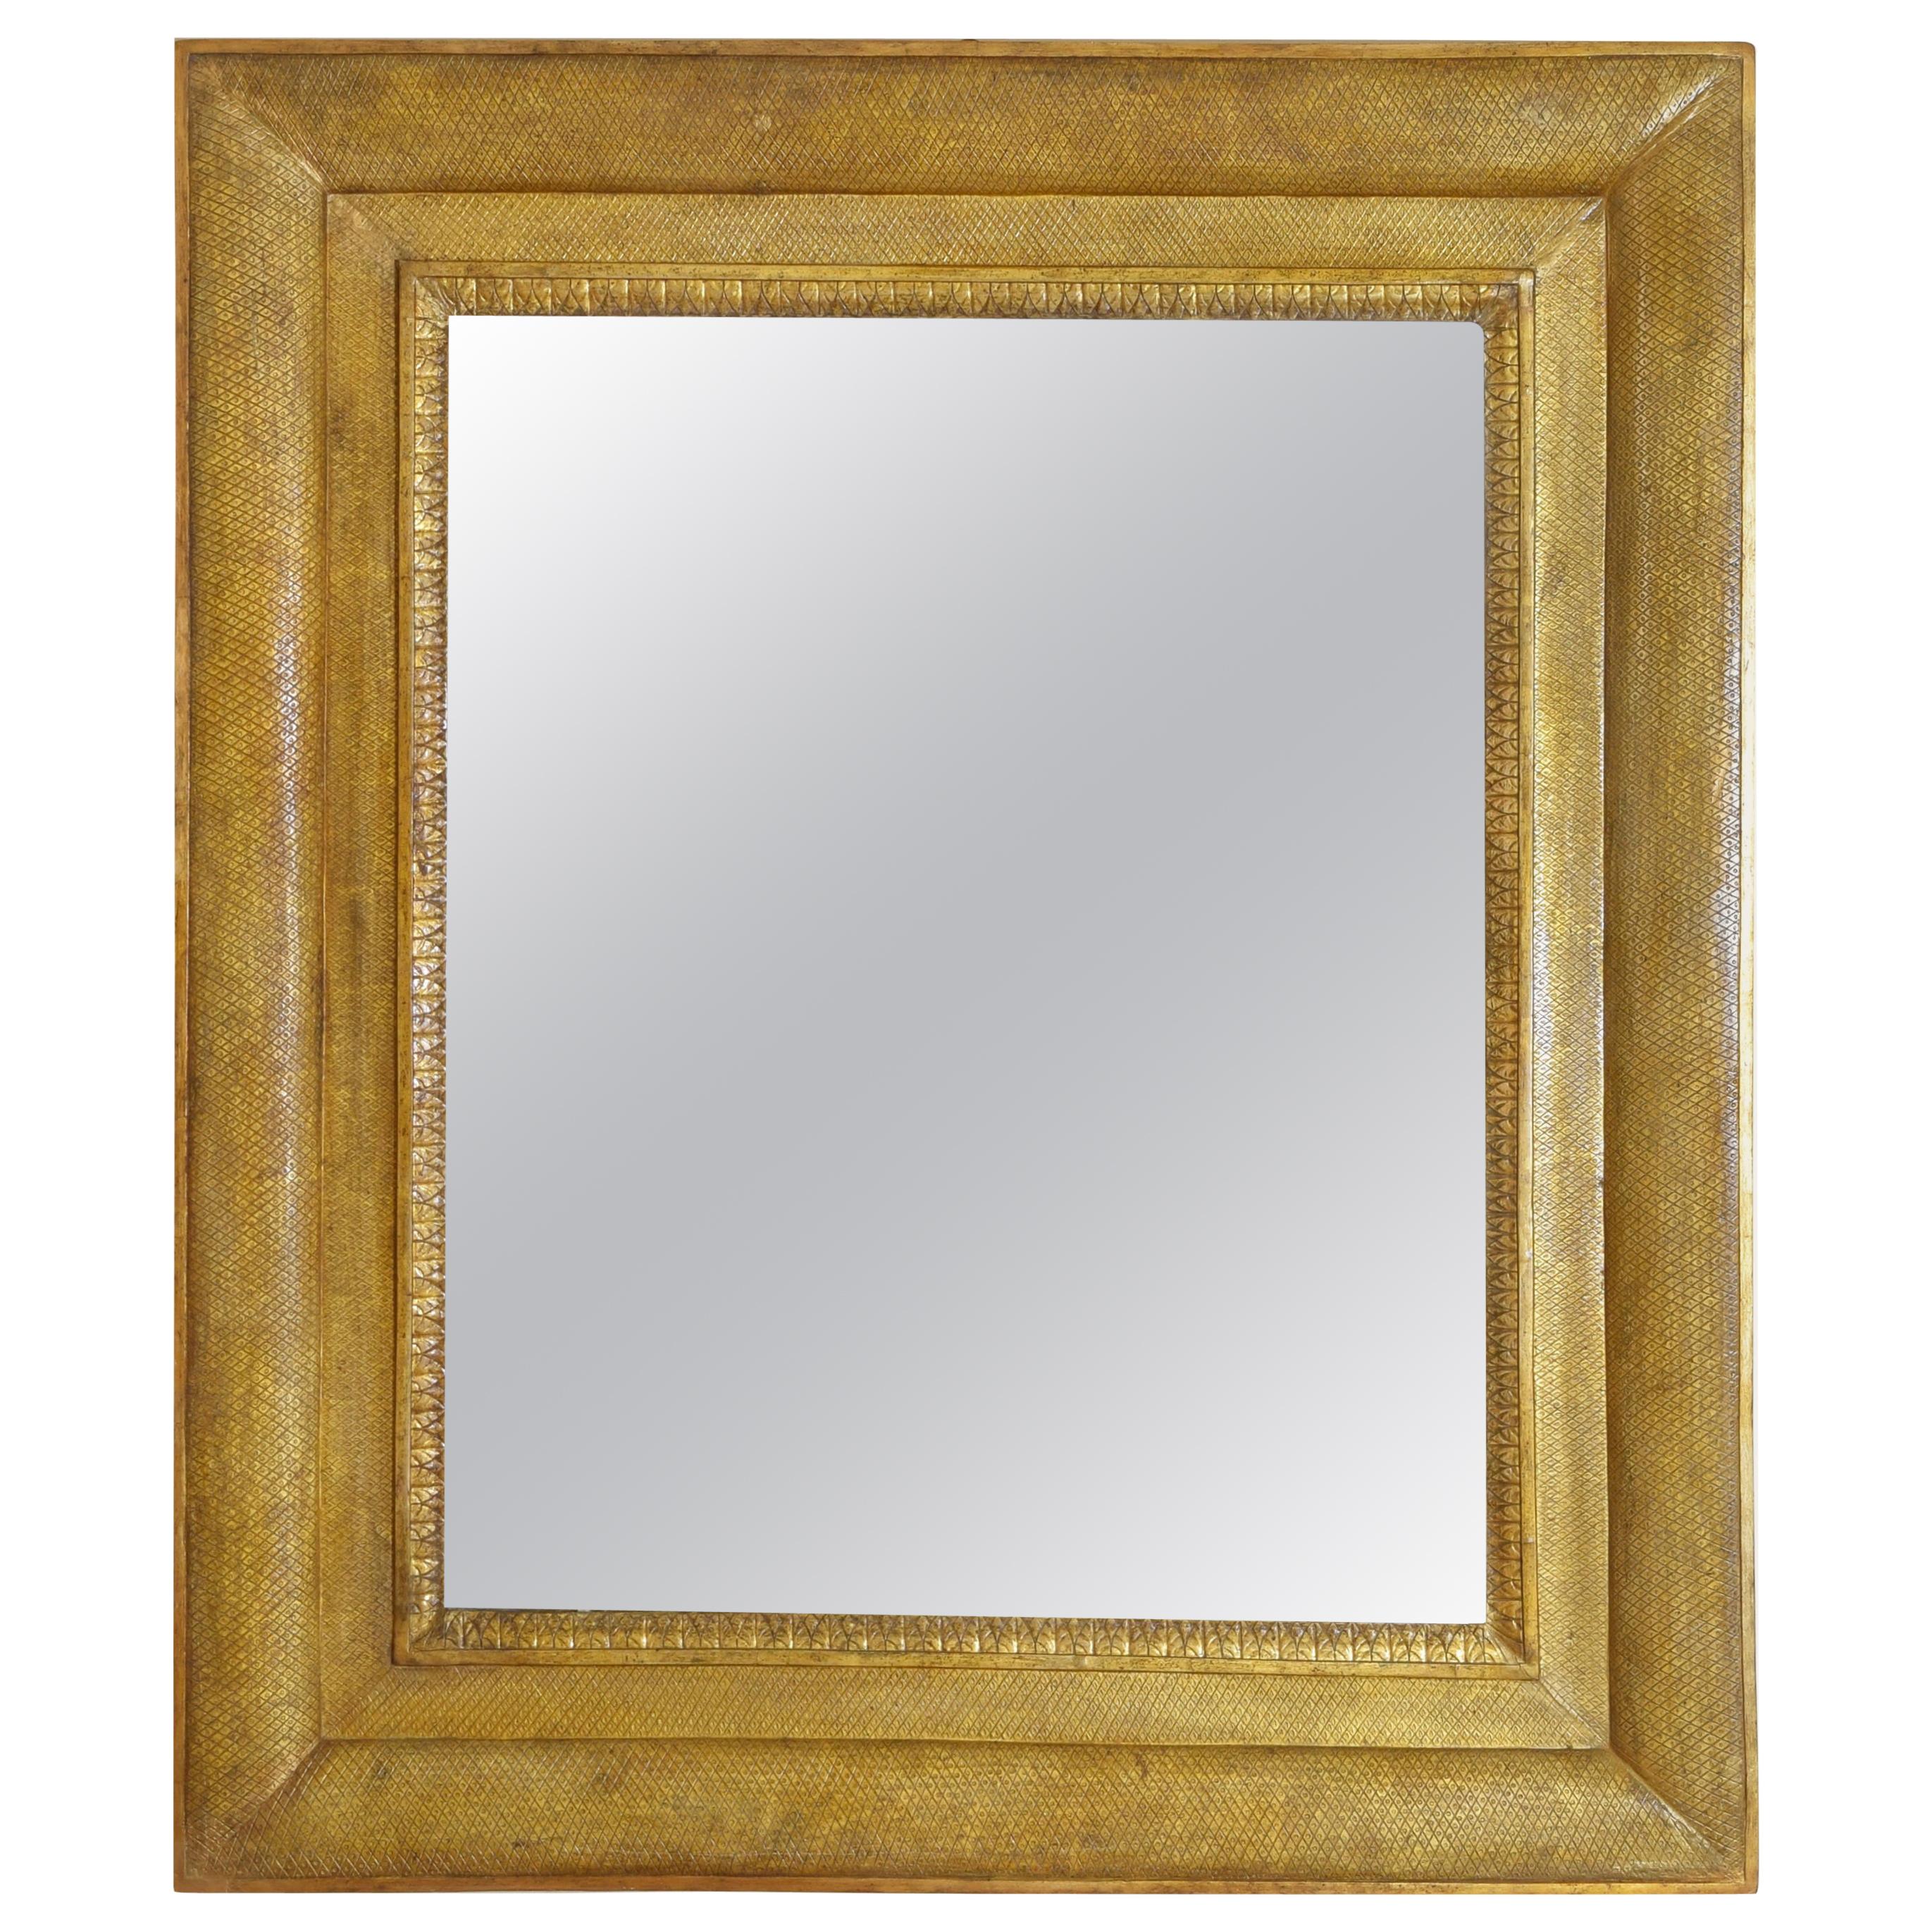 Italian Empire Large Precisely Incised Gilt Gesso Wall Mirror Early 19th Century